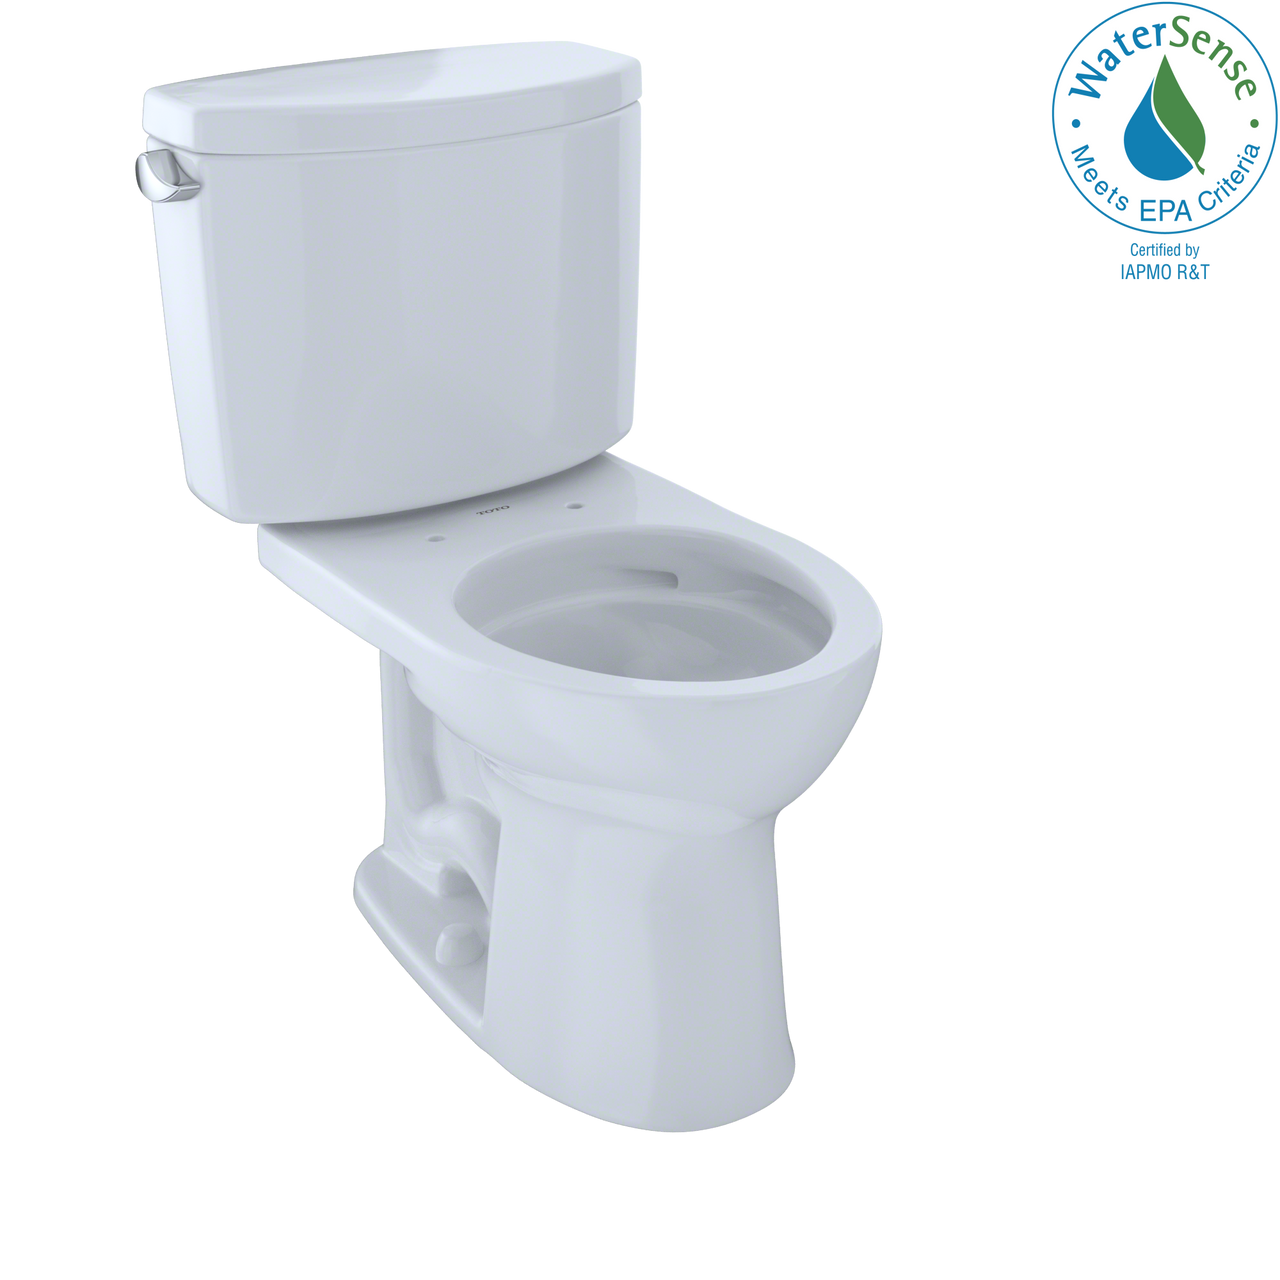 TOTO Drake II Two-Piece Round 1.28 GPF Universal Height Toilet with CeFiONtect,  - CST453CEFG#01 - BNGBath